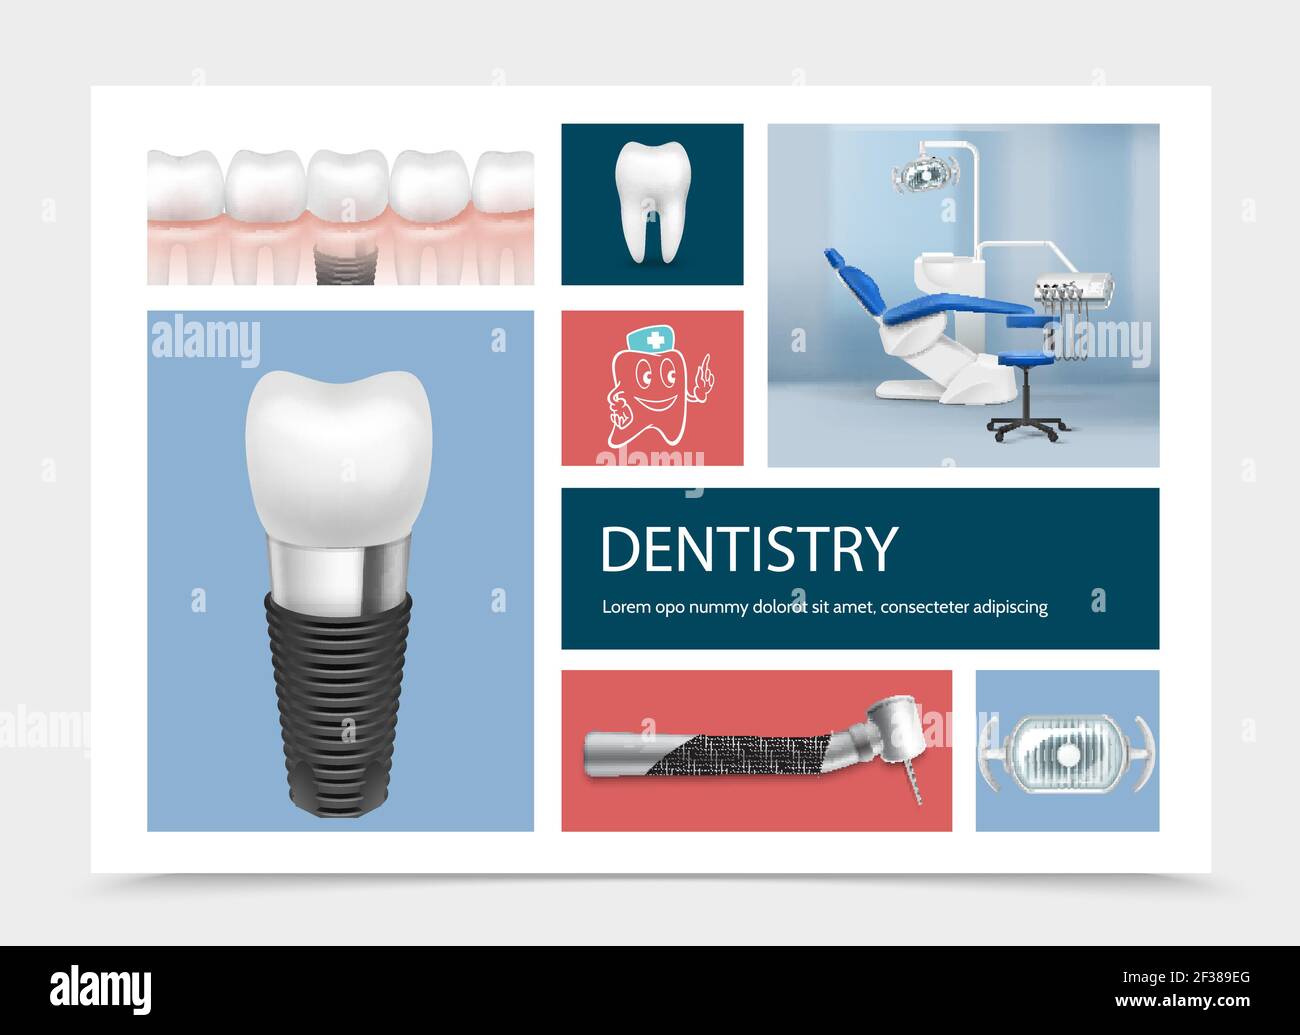 Realistic dentistry elements composition with dental implants tooth machine lamp dentist workplace isolated vector illustration Stock Vector